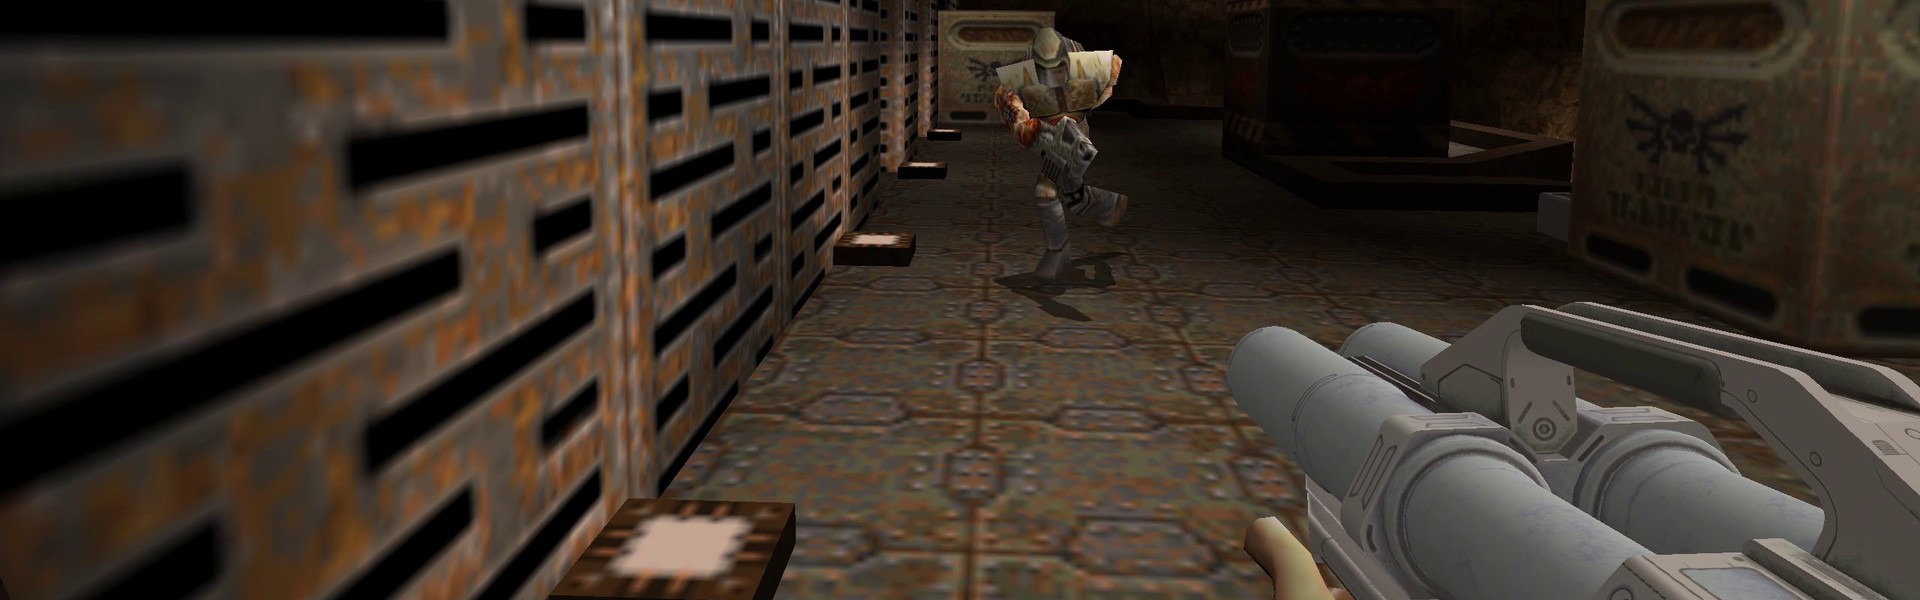 “Quake II” is back! The refreshed classic is now available